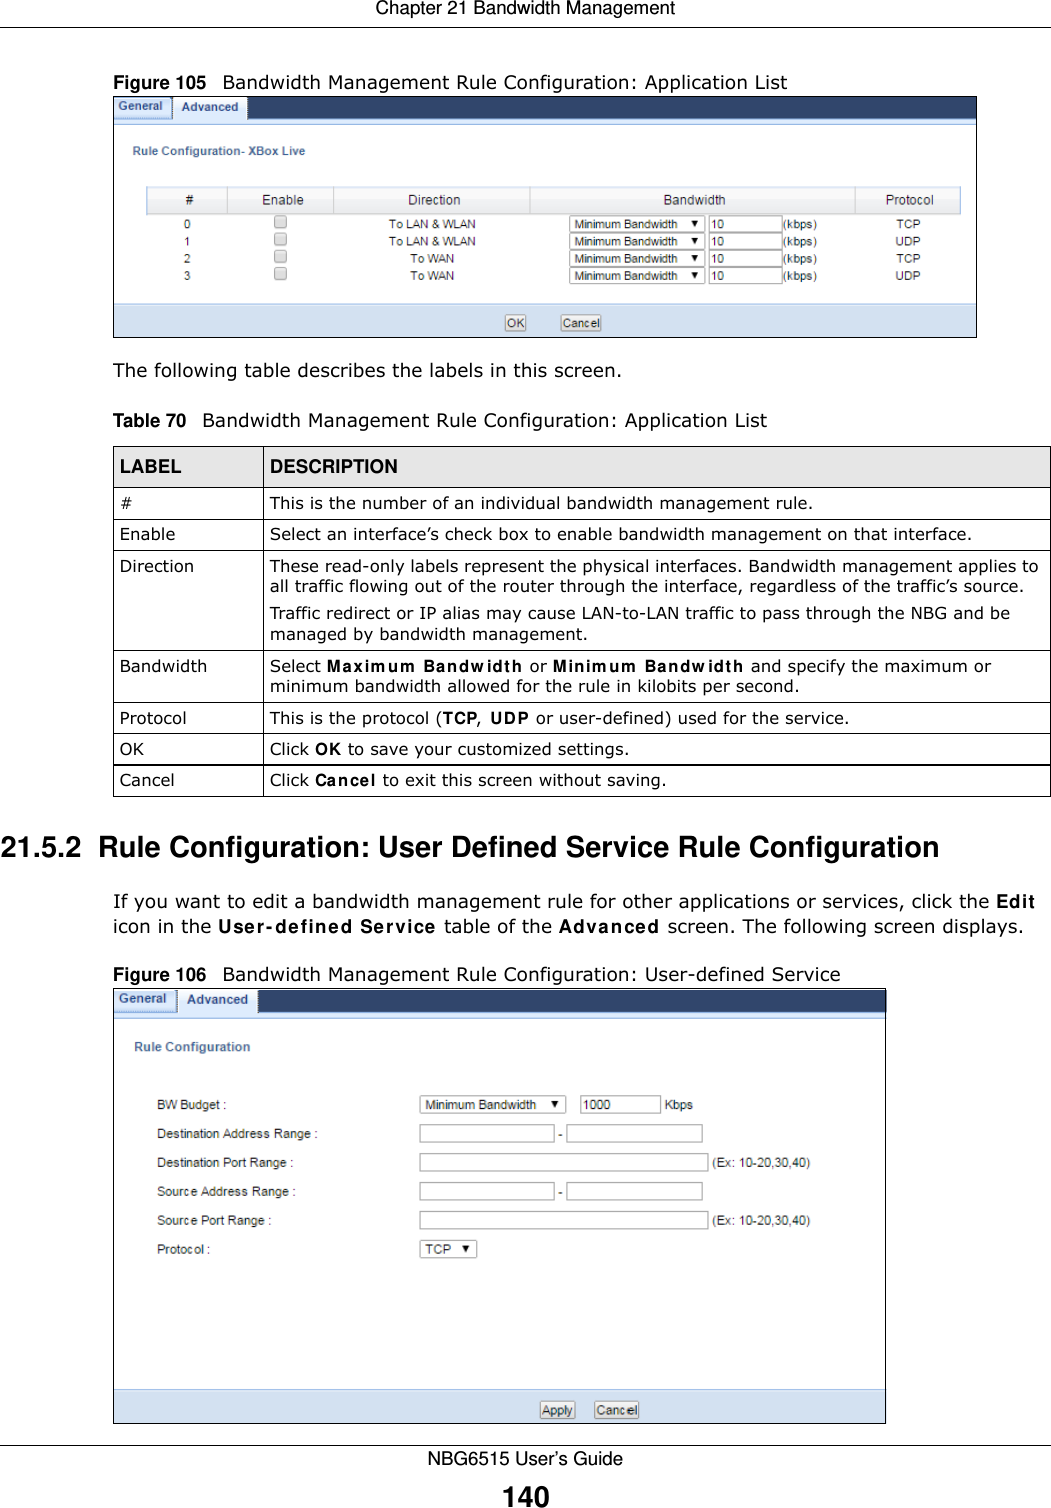 Chapter 21 Bandwidth ManagementNBG6515 User’s Guide140Figure 105   Bandwidth Management Rule Configuration: Application ListThe following table describes the labels in this screen.21.5.2  Rule Configuration: User Defined Service Rule Configuration    If you want to edit a bandwidth management rule for other applications or services, click the Edit icon in the User-defined Service table of the Advanced screen. The following screen displays.Figure 106   Bandwidth Management Rule Configuration: User-defined Service Table 70   Bandwidth Management Rule Configuration: Application ListLABEL DESCRIPTION#This is the number of an individual bandwidth management rule.Enable Select an interface’s check box to enable bandwidth management on that interface. Direction  These read-only labels represent the physical interfaces. Bandwidth management applies to all traffic flowing out of the router through the interface, regardless of the traffic’s source.Traffic redirect or IP alias may cause LAN-to-LAN traffic to pass through the NBG and be managed by bandwidth management.Bandwidth Select Maximum Bandwidth or Minimum Bandwidth and specify the maximum or minimum bandwidth allowed for the rule in kilobits per second. Protocol This is the protocol (TCP, UDP or user-defined) used for the service.OK Click OK to save your customized settings.Cancel Click Cancel to exit this screen without saving.